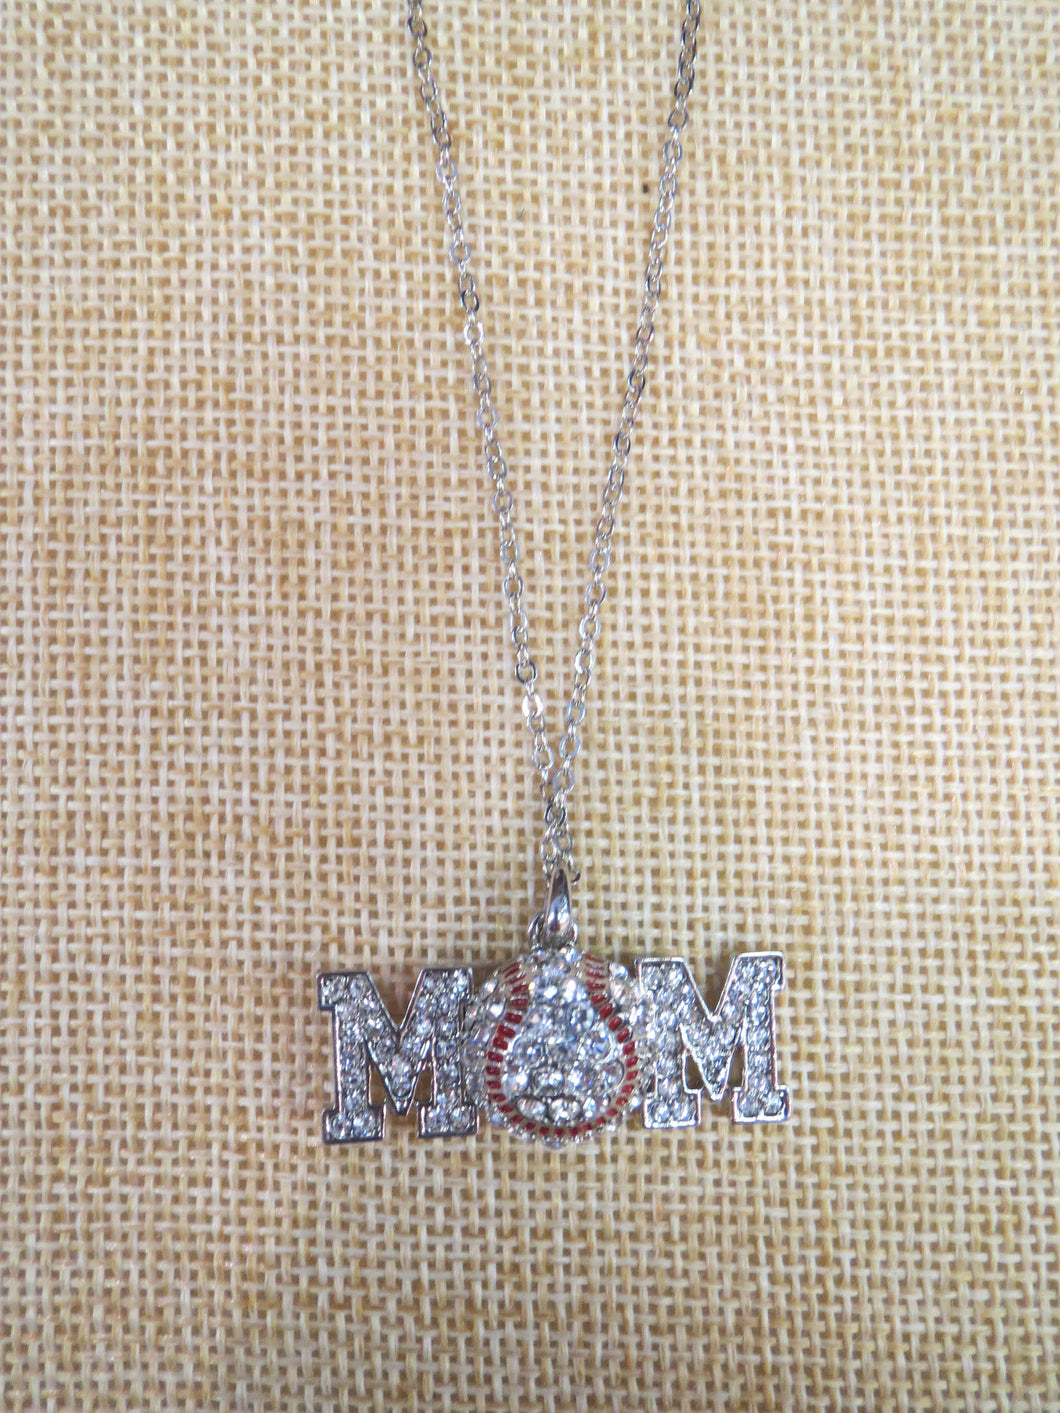 ADO | Hometown Pride Baseball Mom Necklace - All Decd Out